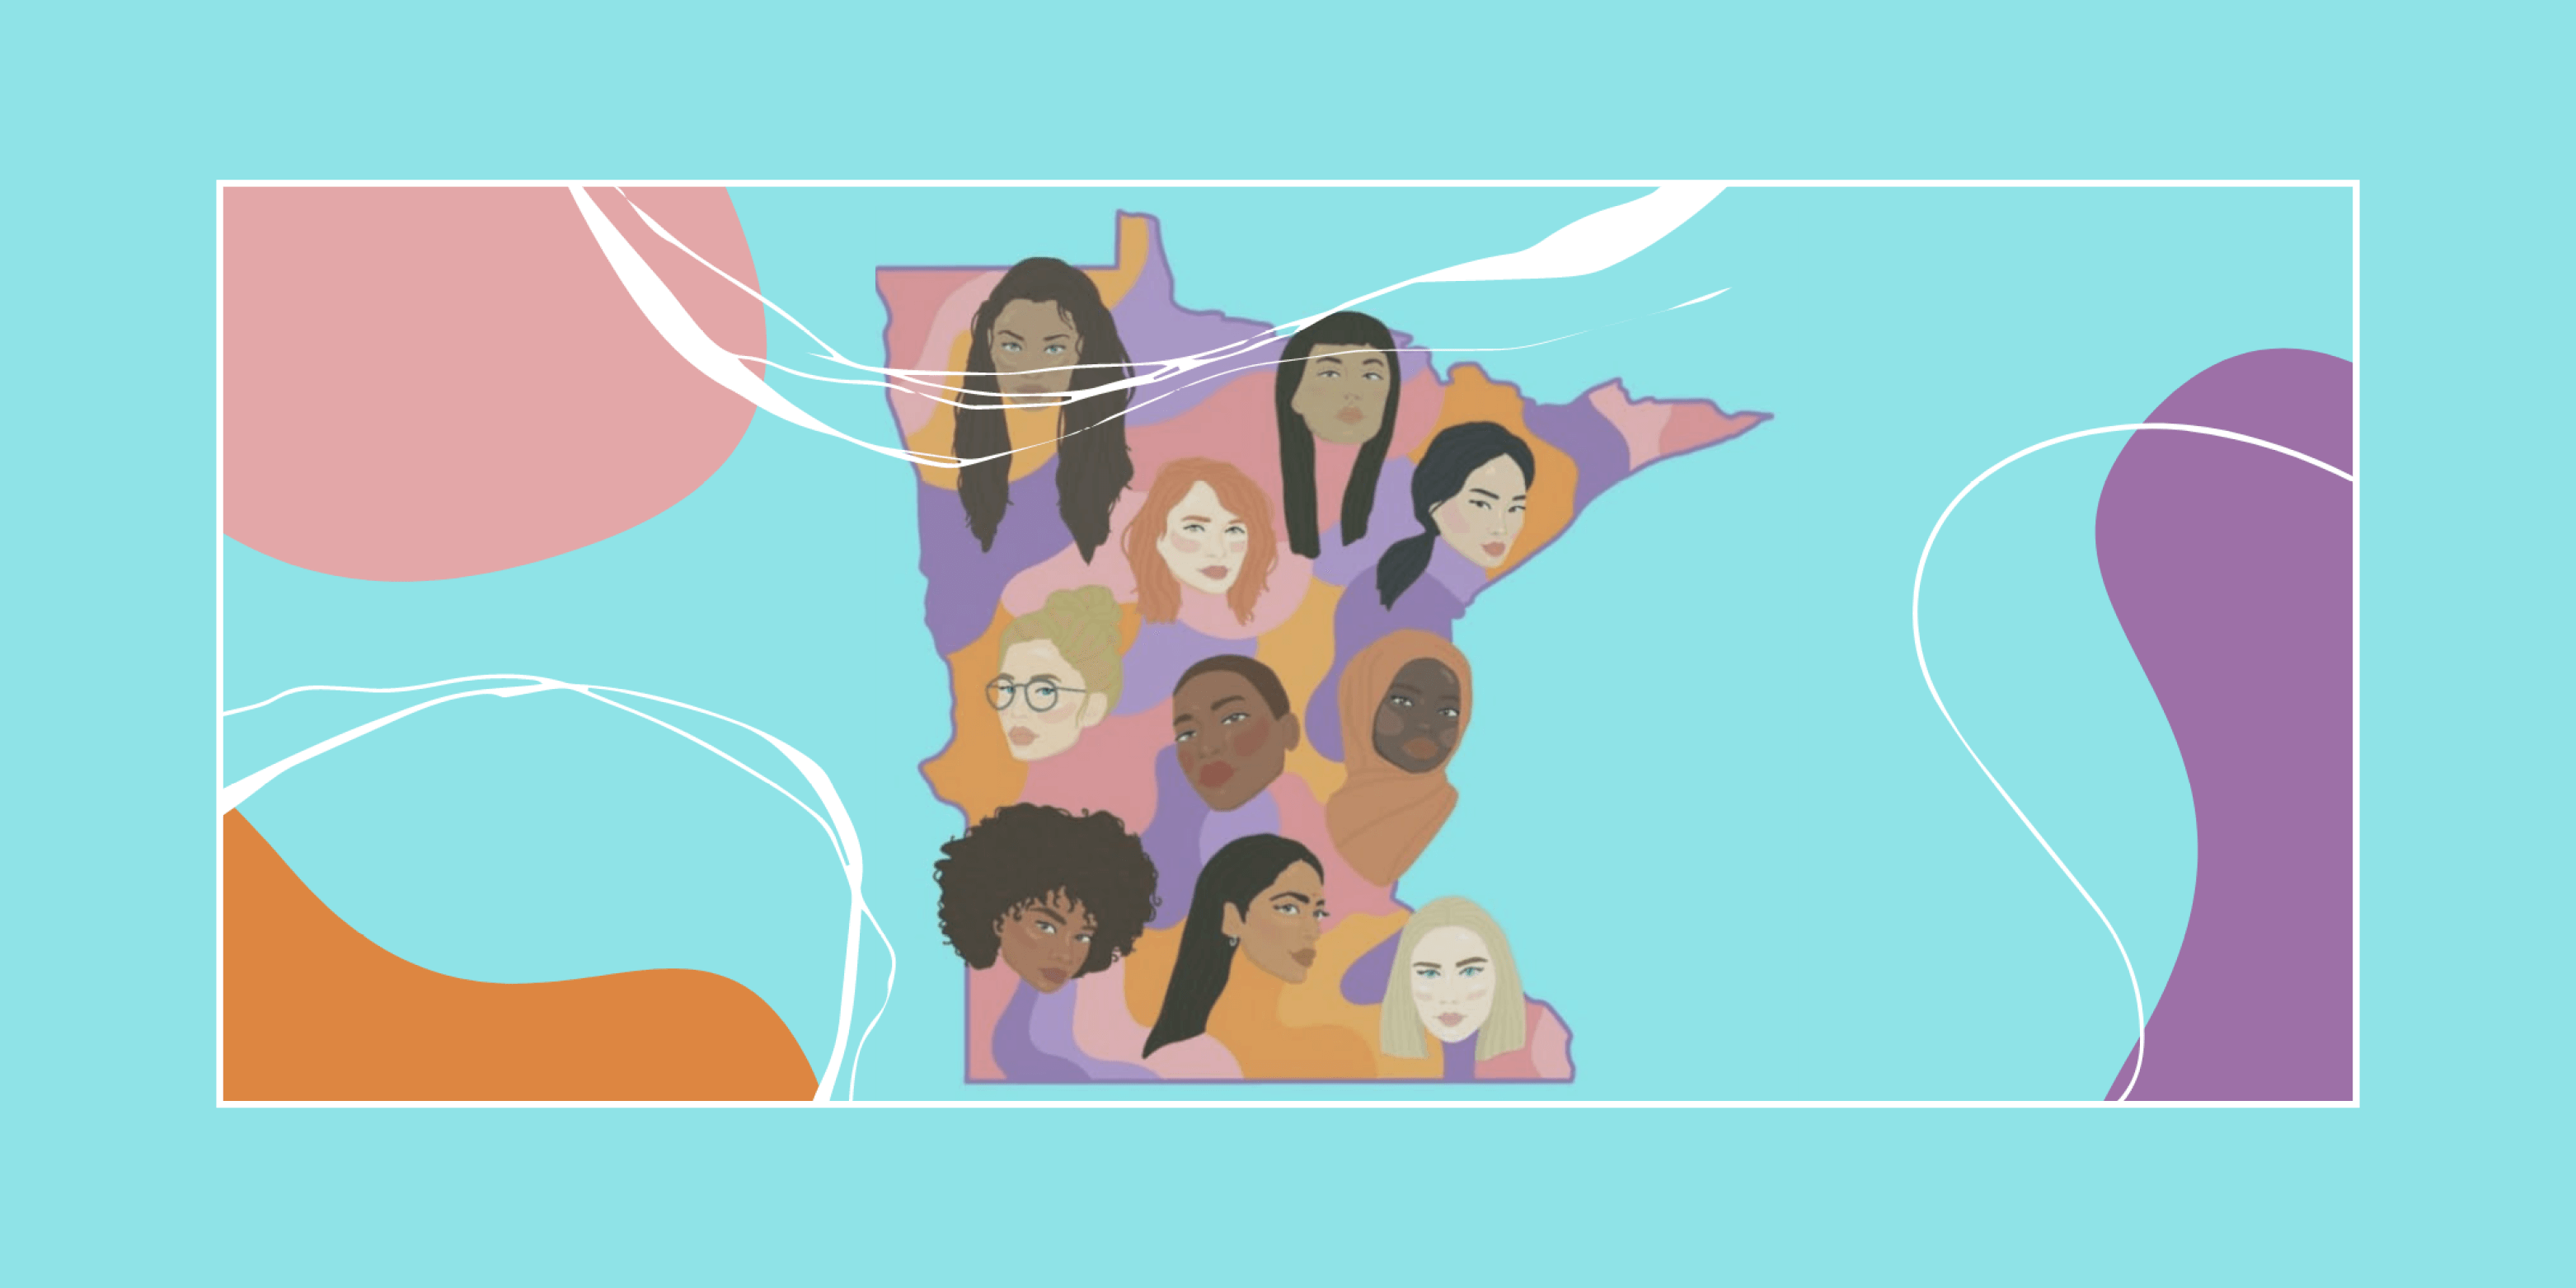 stylized illustration of women's portraits overlaid on the state of Minnesota